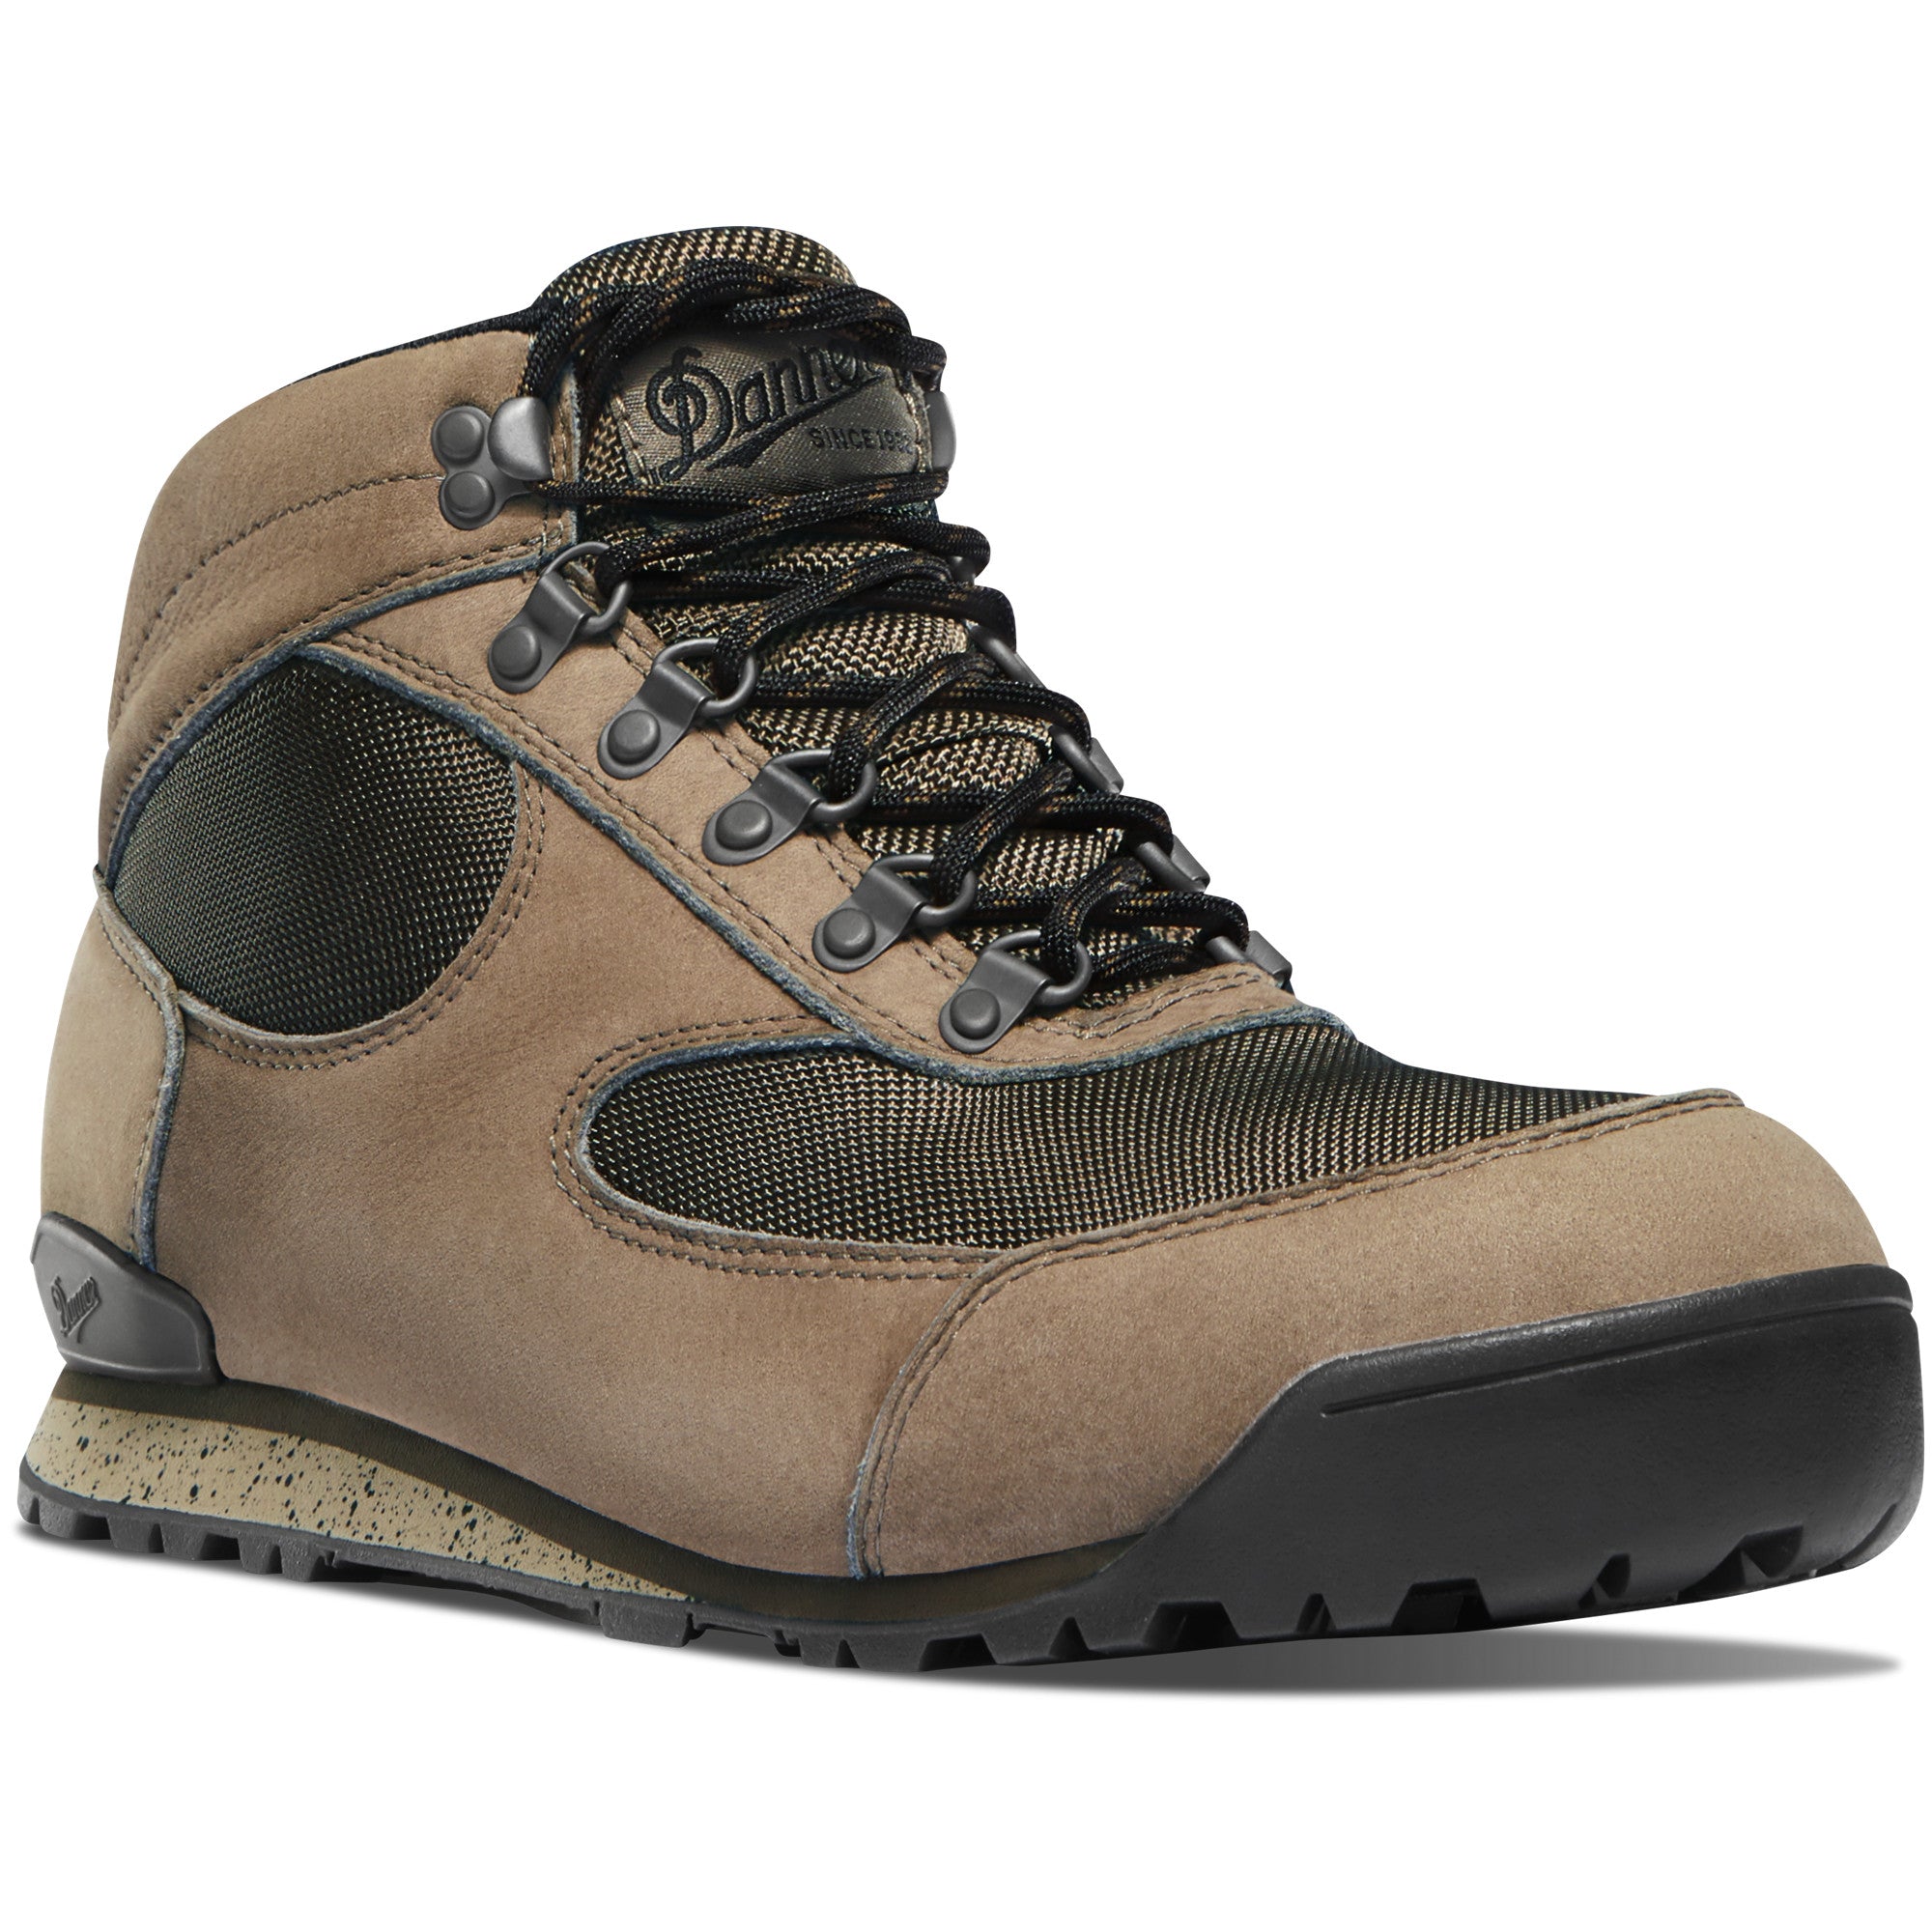 Danner Men's Jag 4.5" Waterproof Hiking Boot in Sandy Taupe from the side